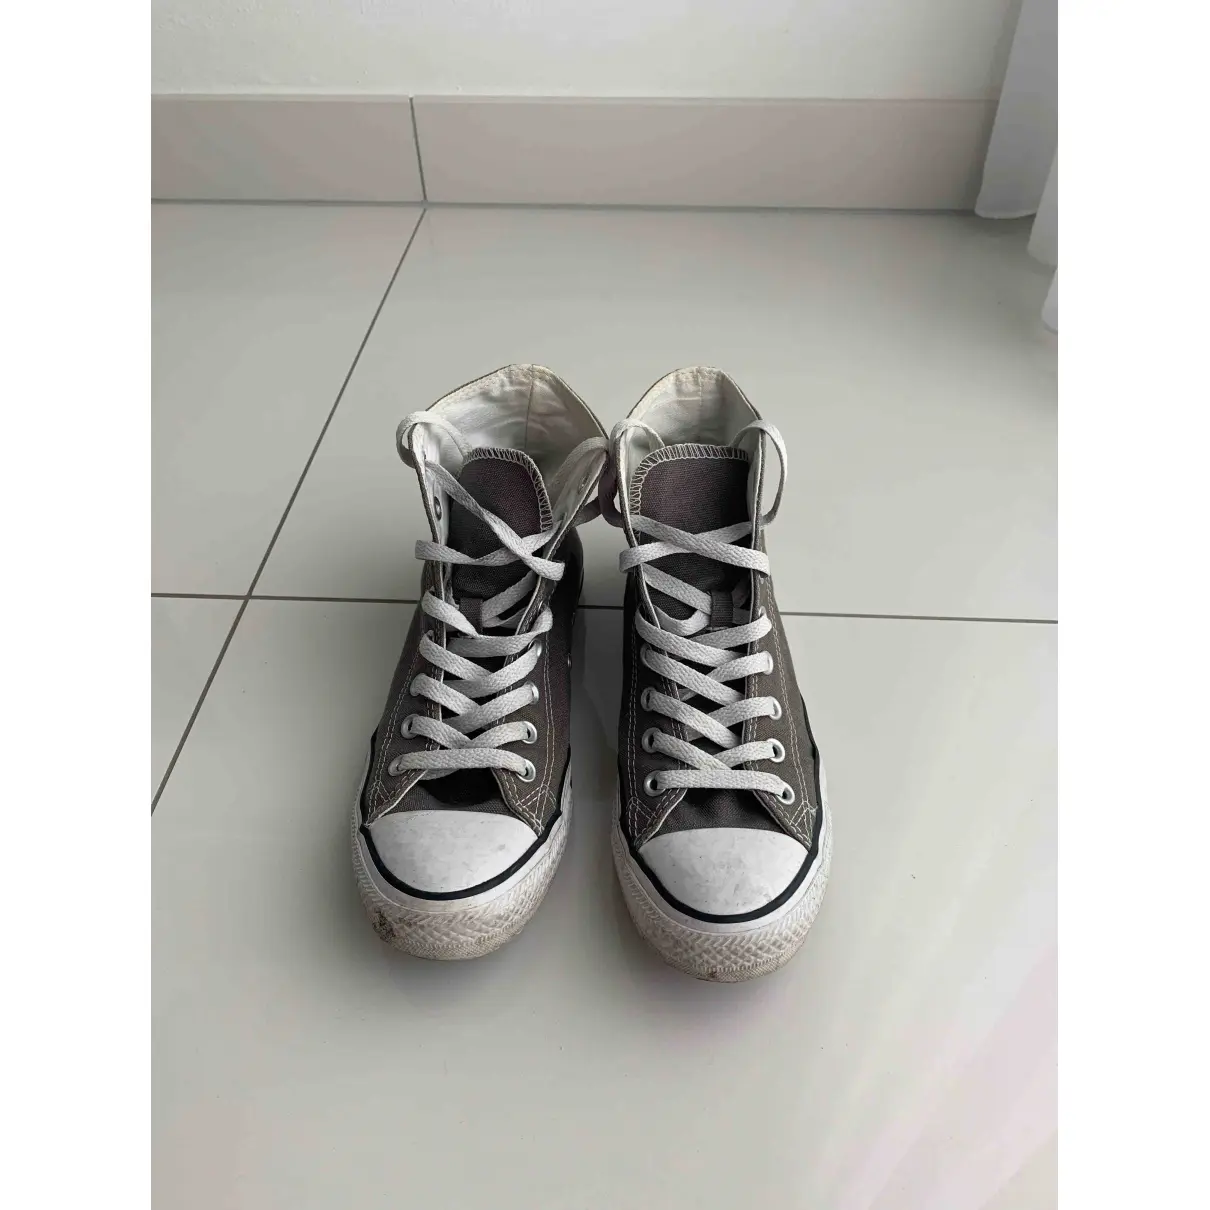 Buy Converse Cloth high trainers online